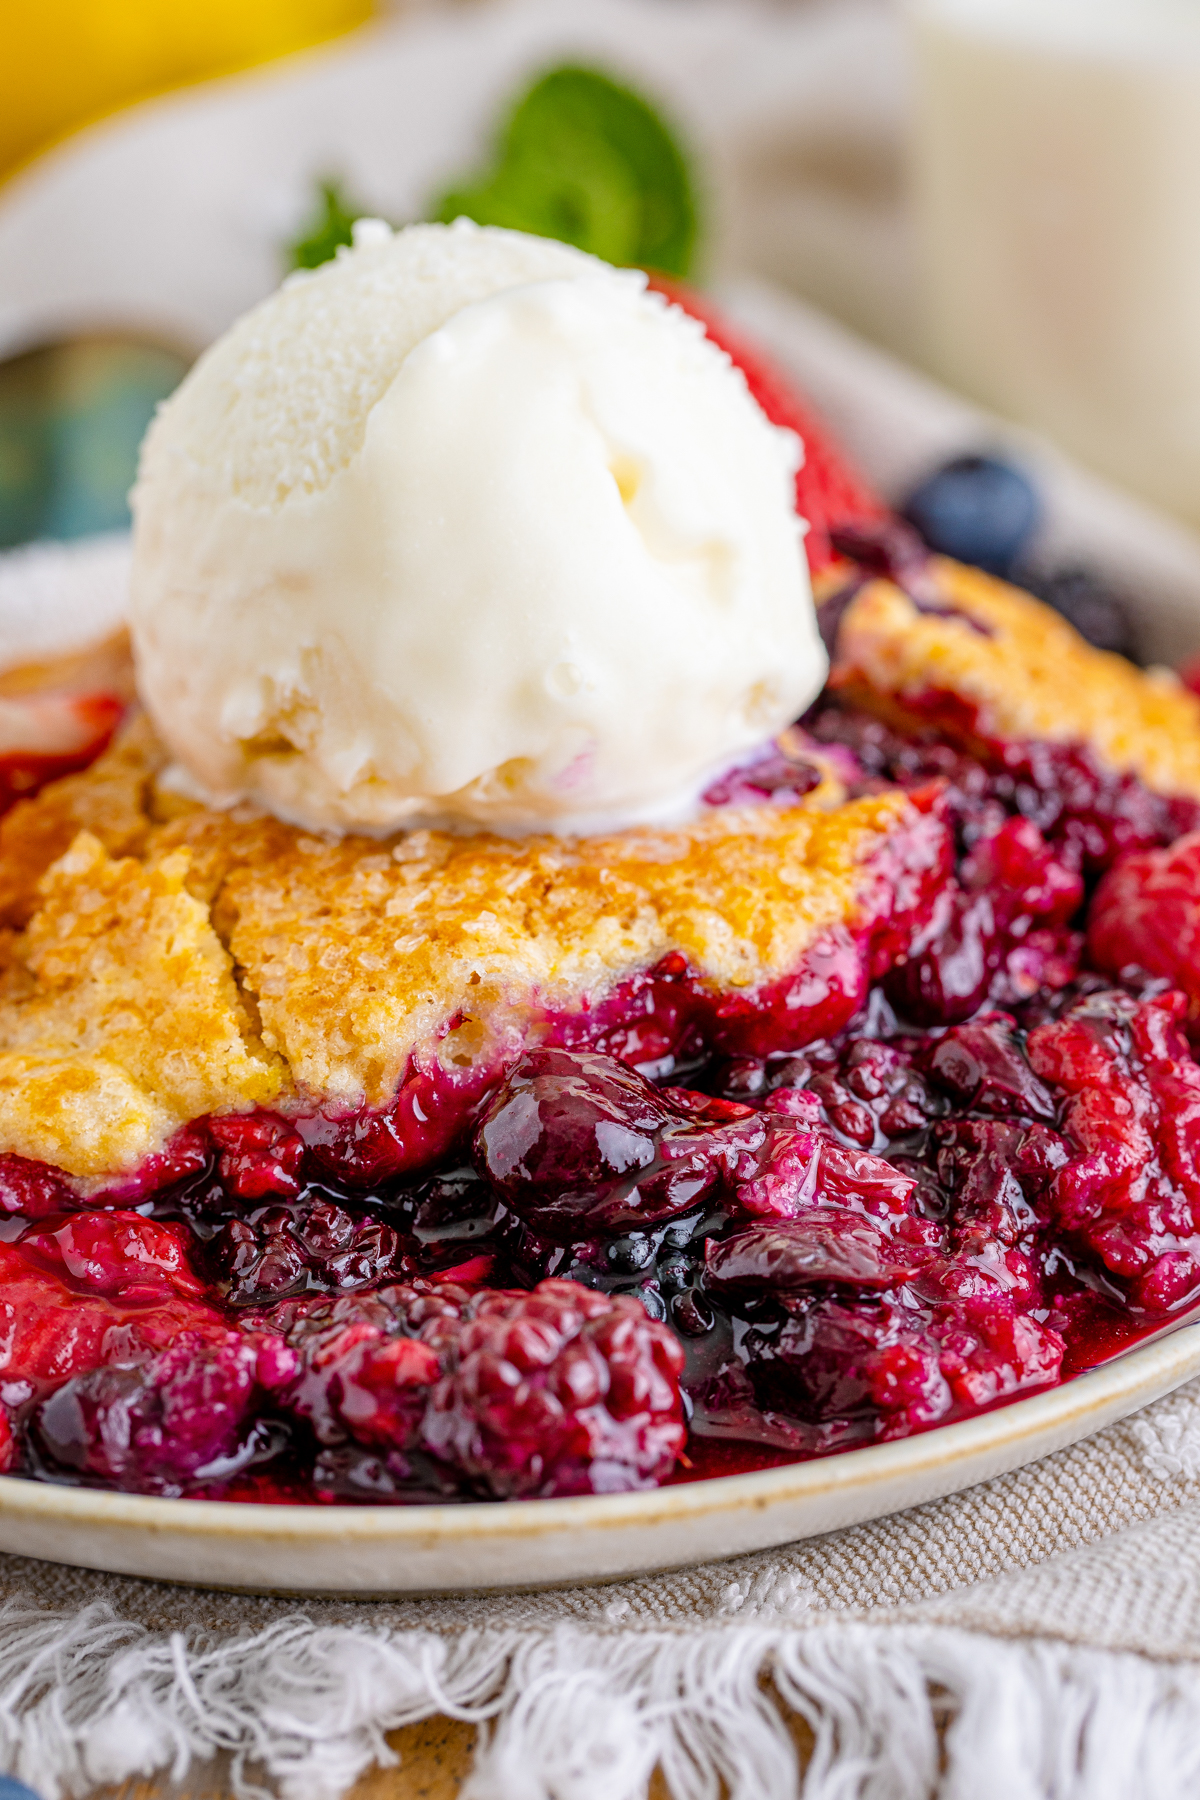 Piece of mixed berry cobbler with ice cream on top